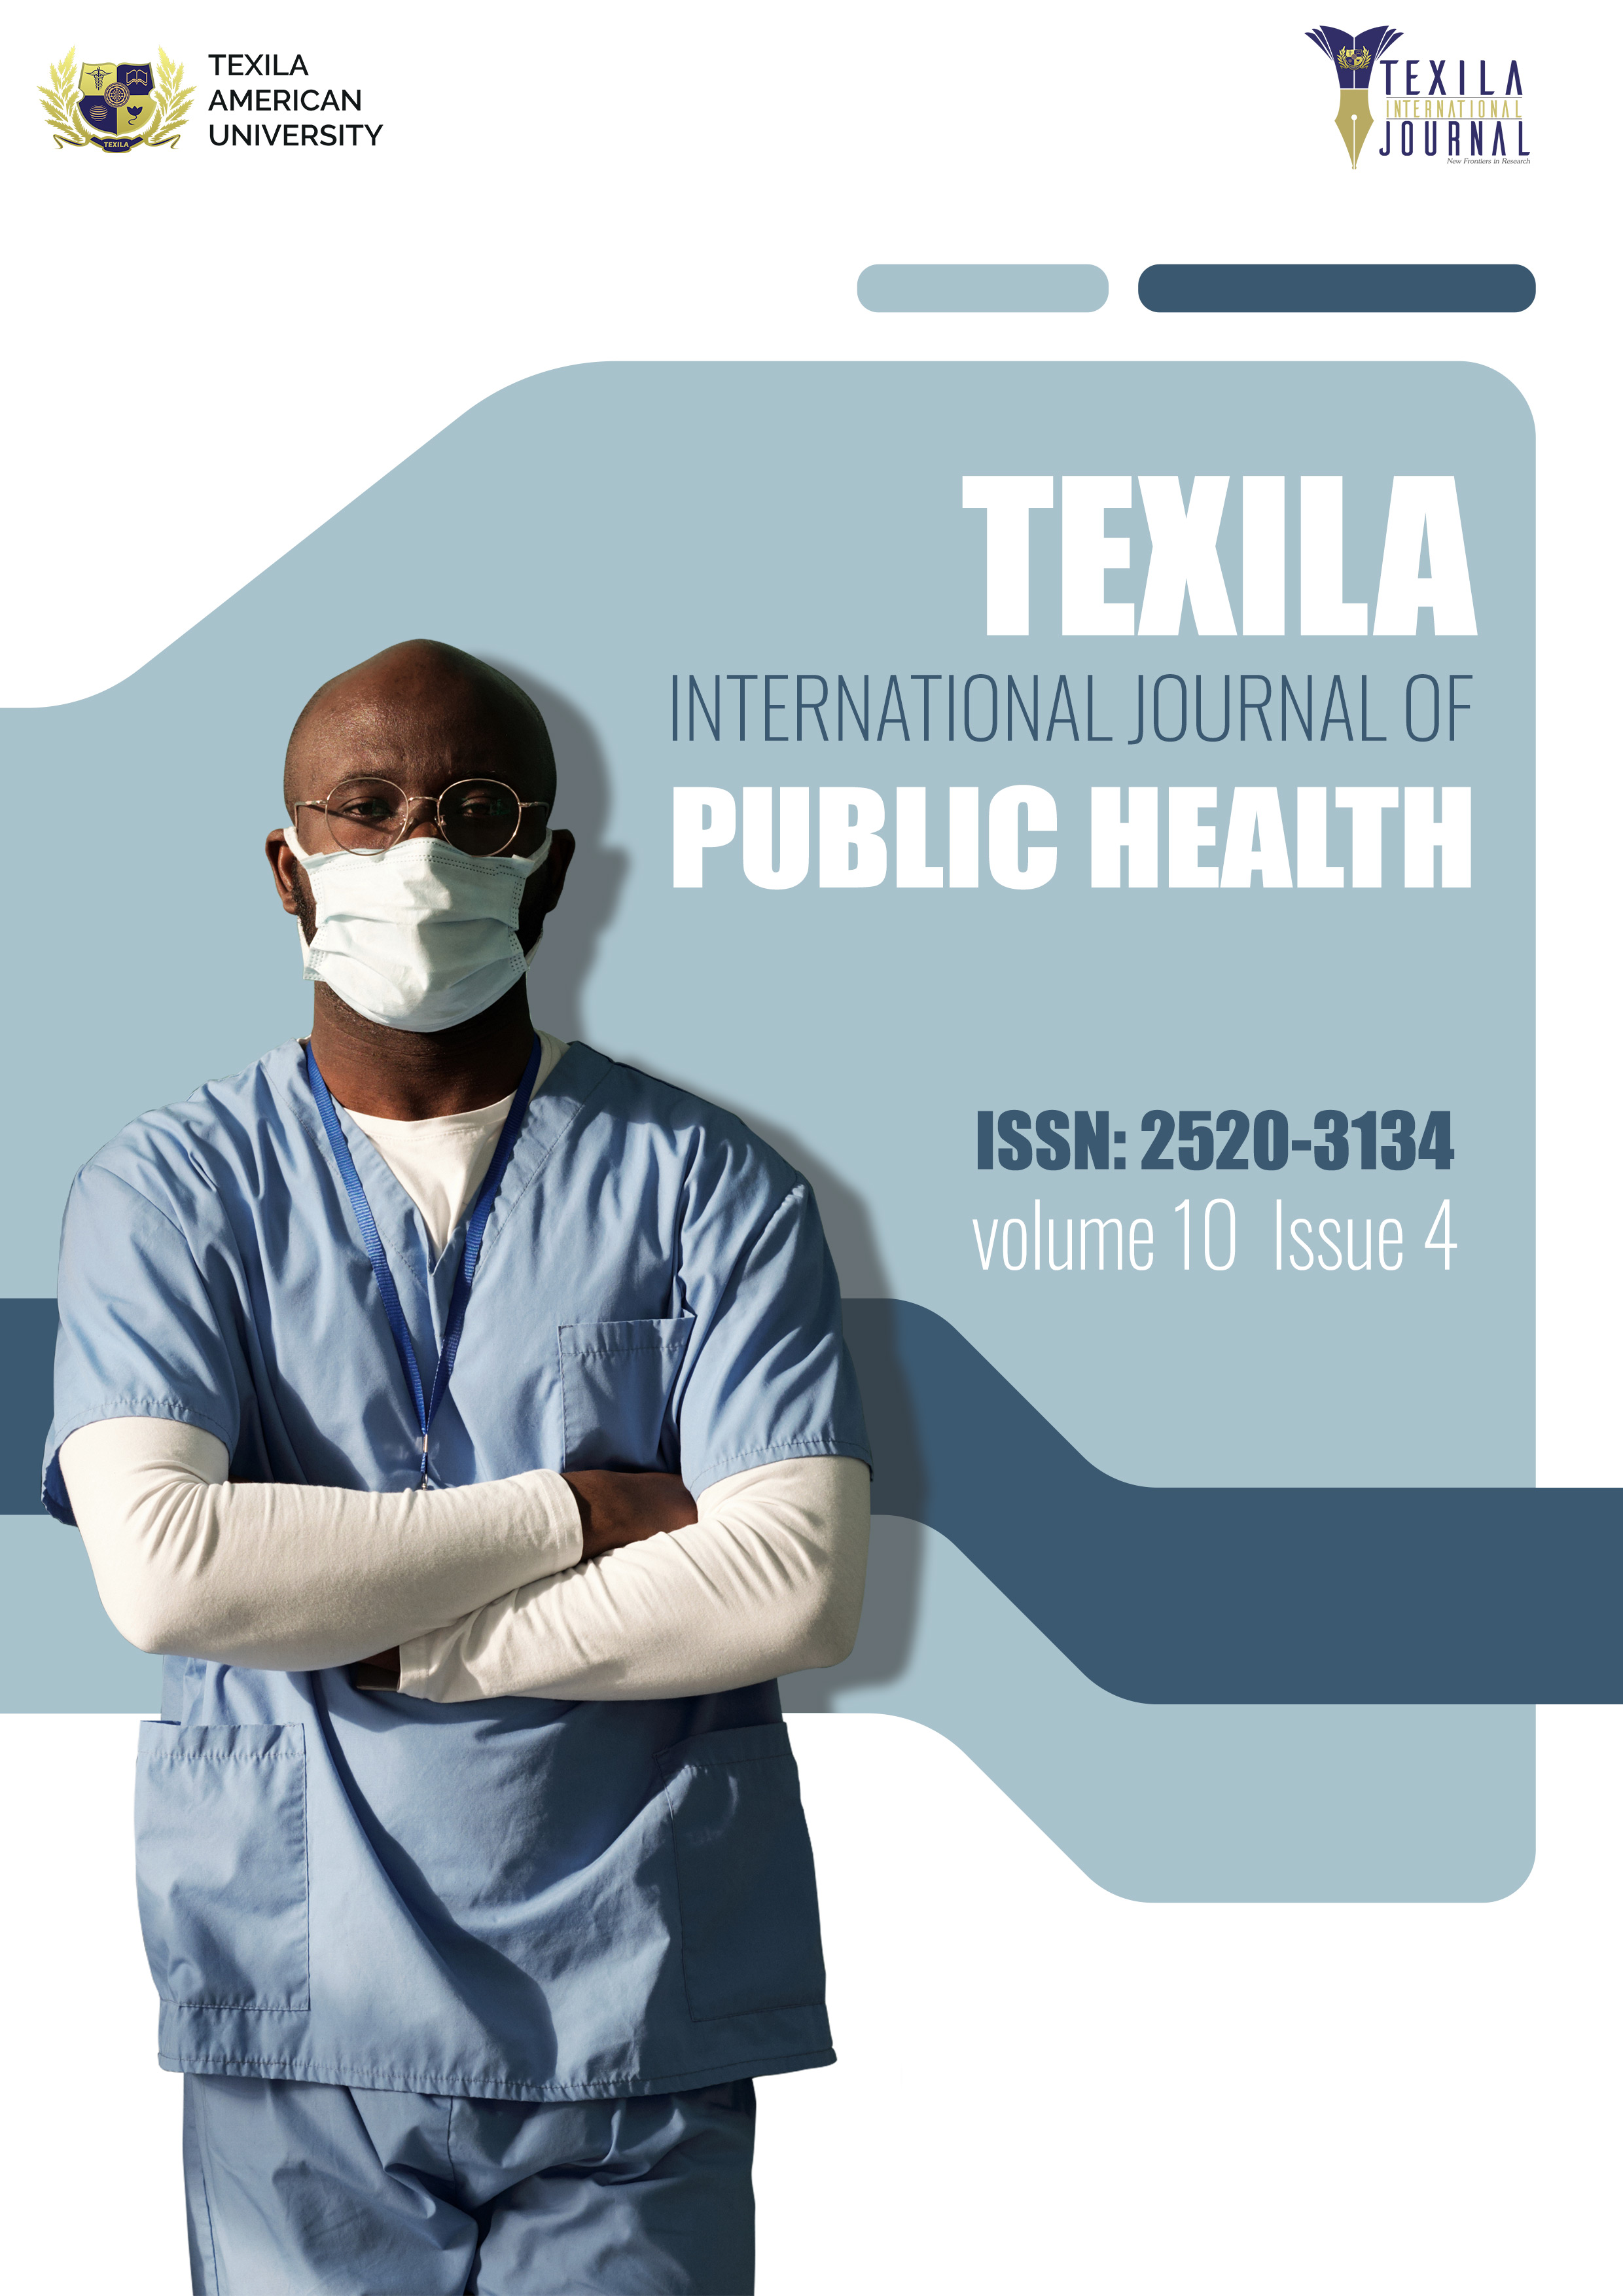 Int. J. Environ. Res. Public Health, Volume 20, Issue 5 (March-1 2023) –  901 articles